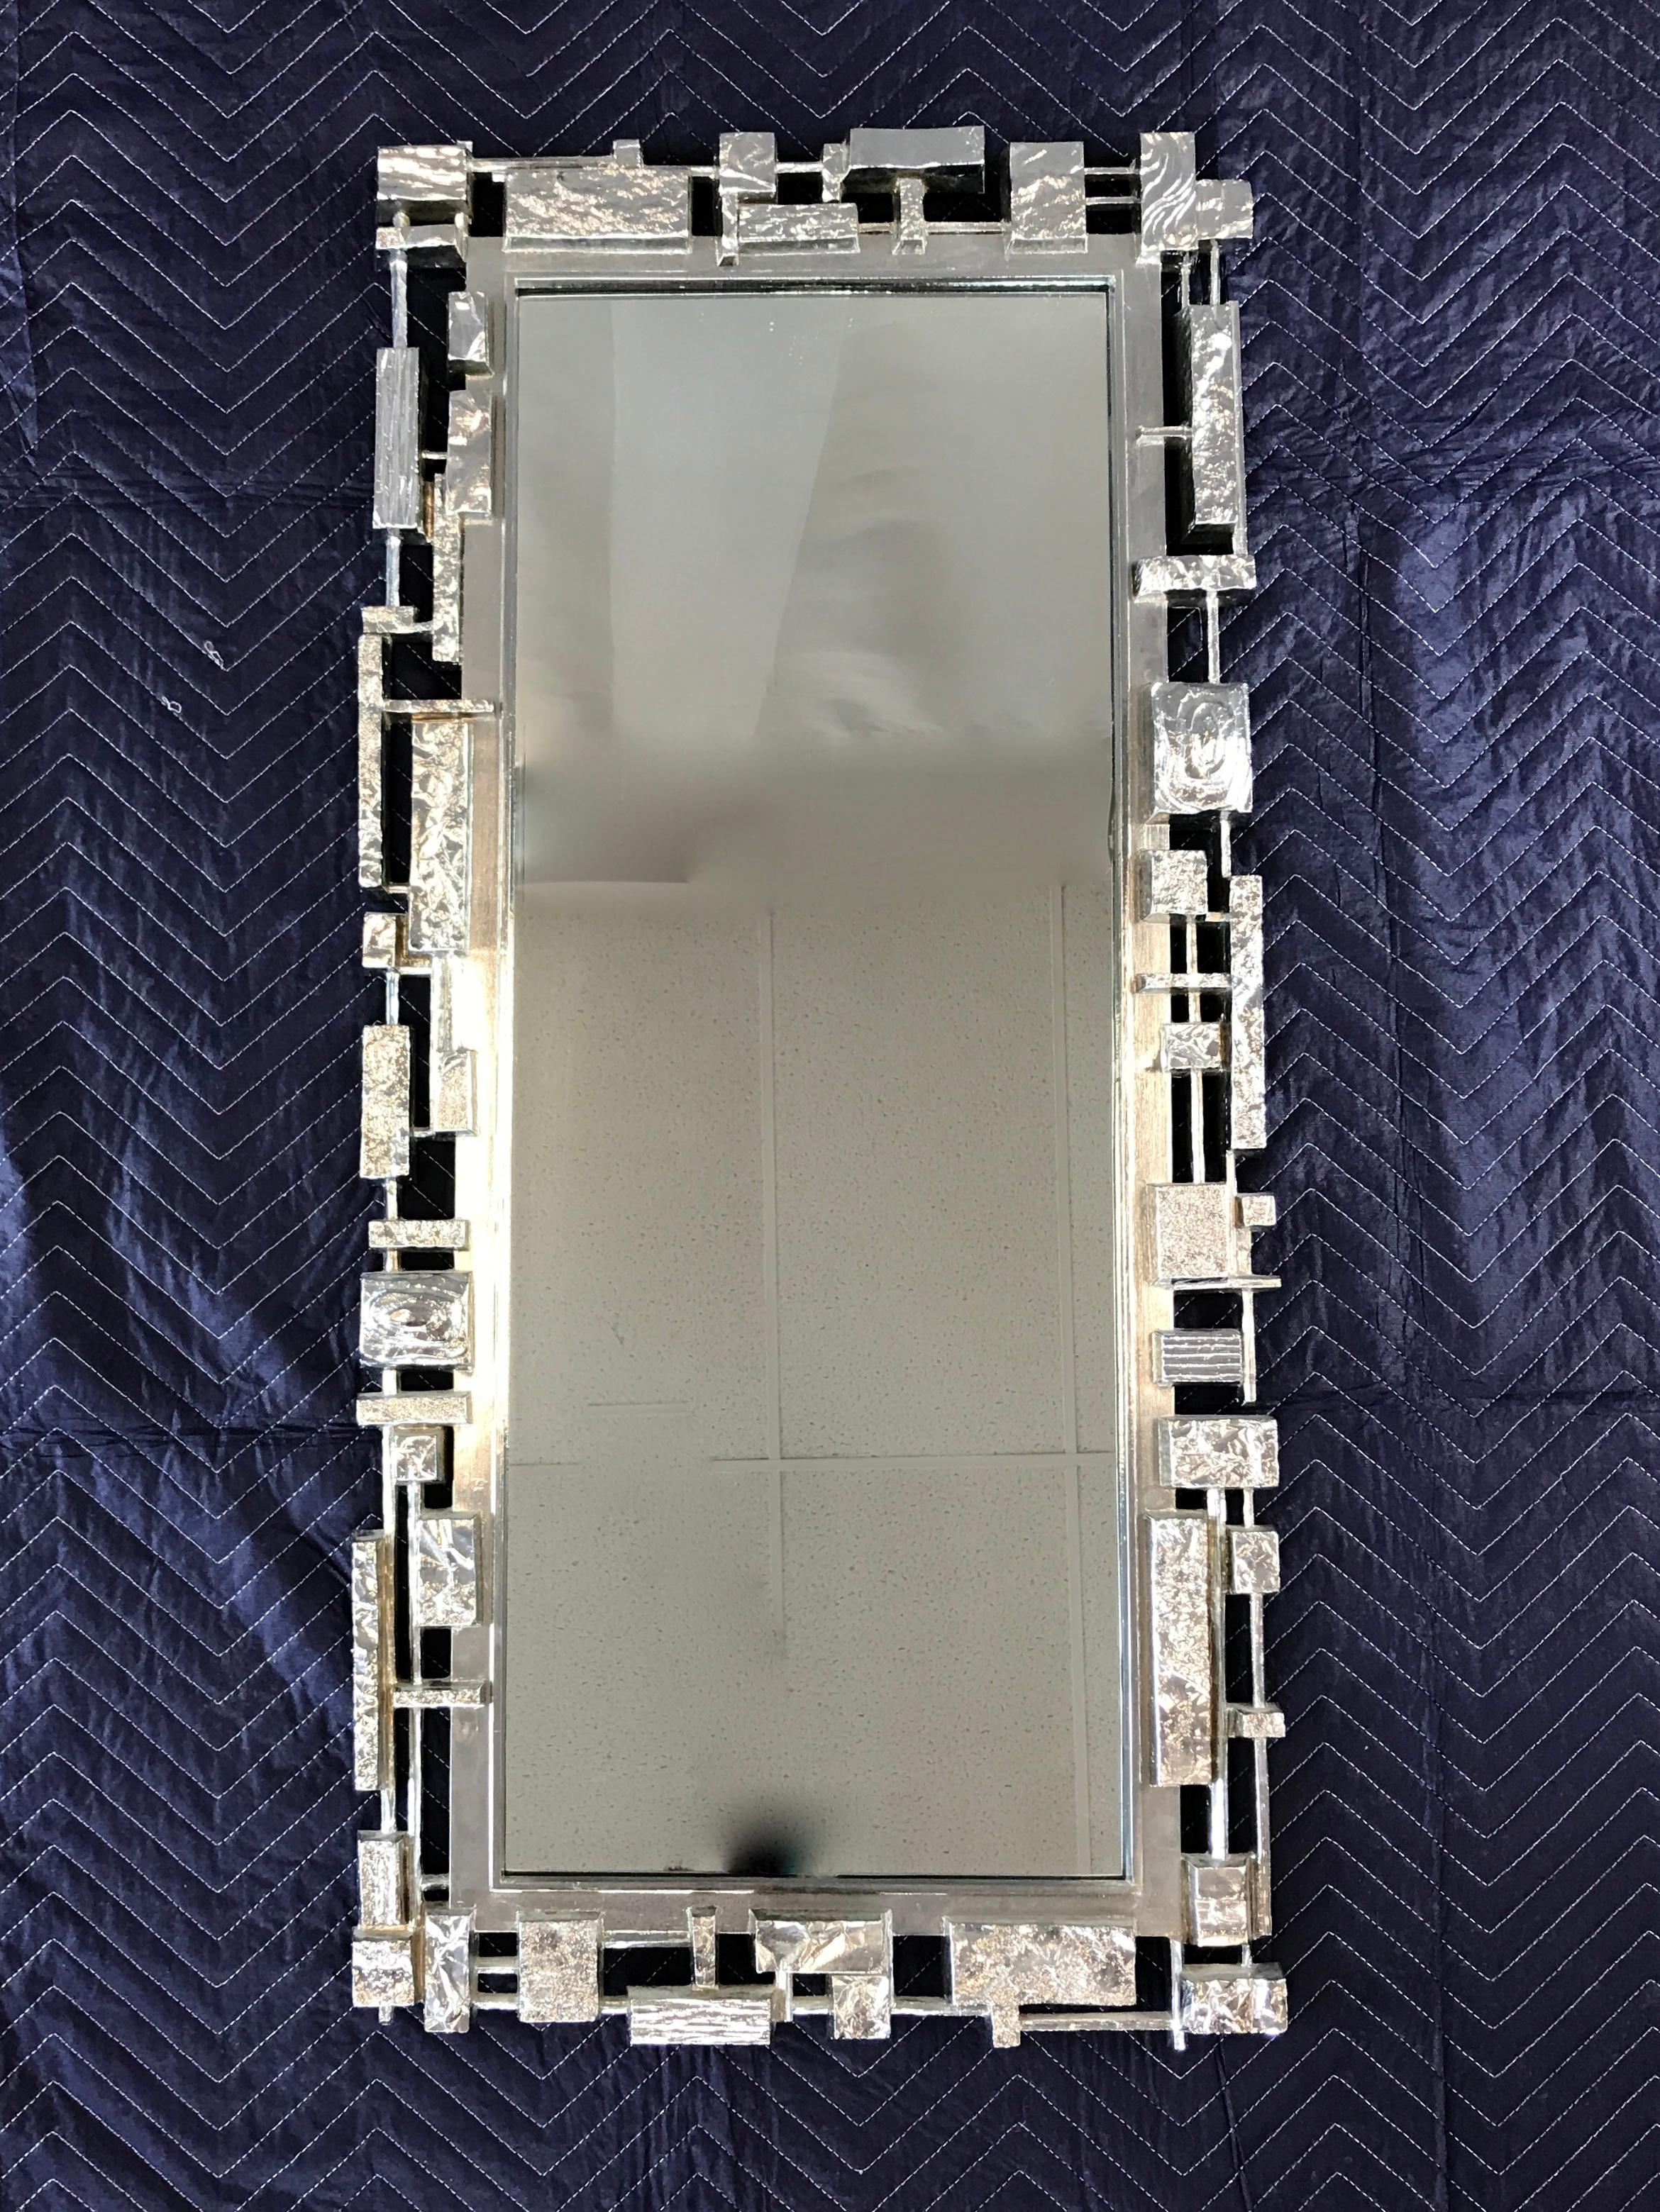 Offer here is a circa 1960s Syroco Brutalist style wall-mounted mirror. By the Syracuse Ornamental Company. Injection molded plastic construction with the outside a type of metallic finish in silver.